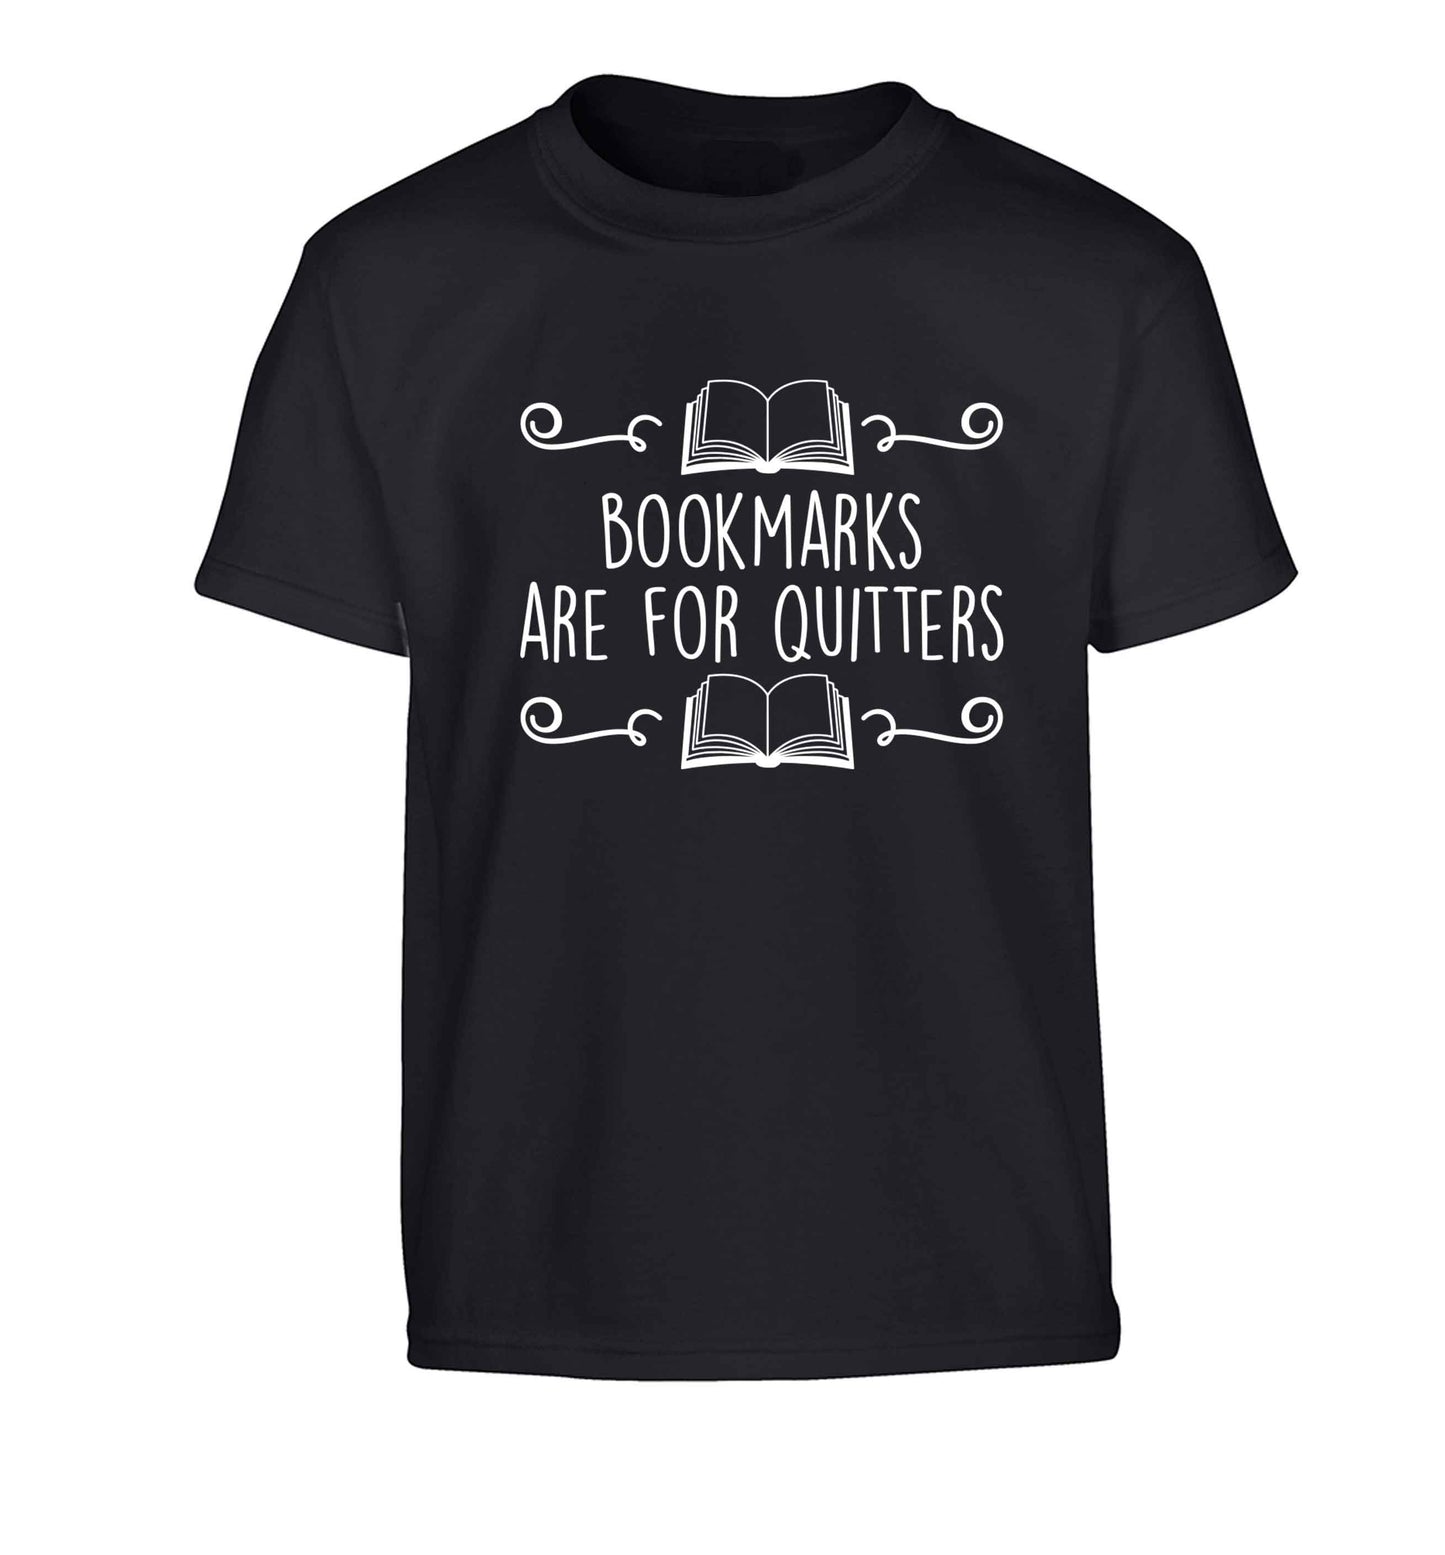 Bookmarks are for quitters Children's black Tshirt 12-13 Years